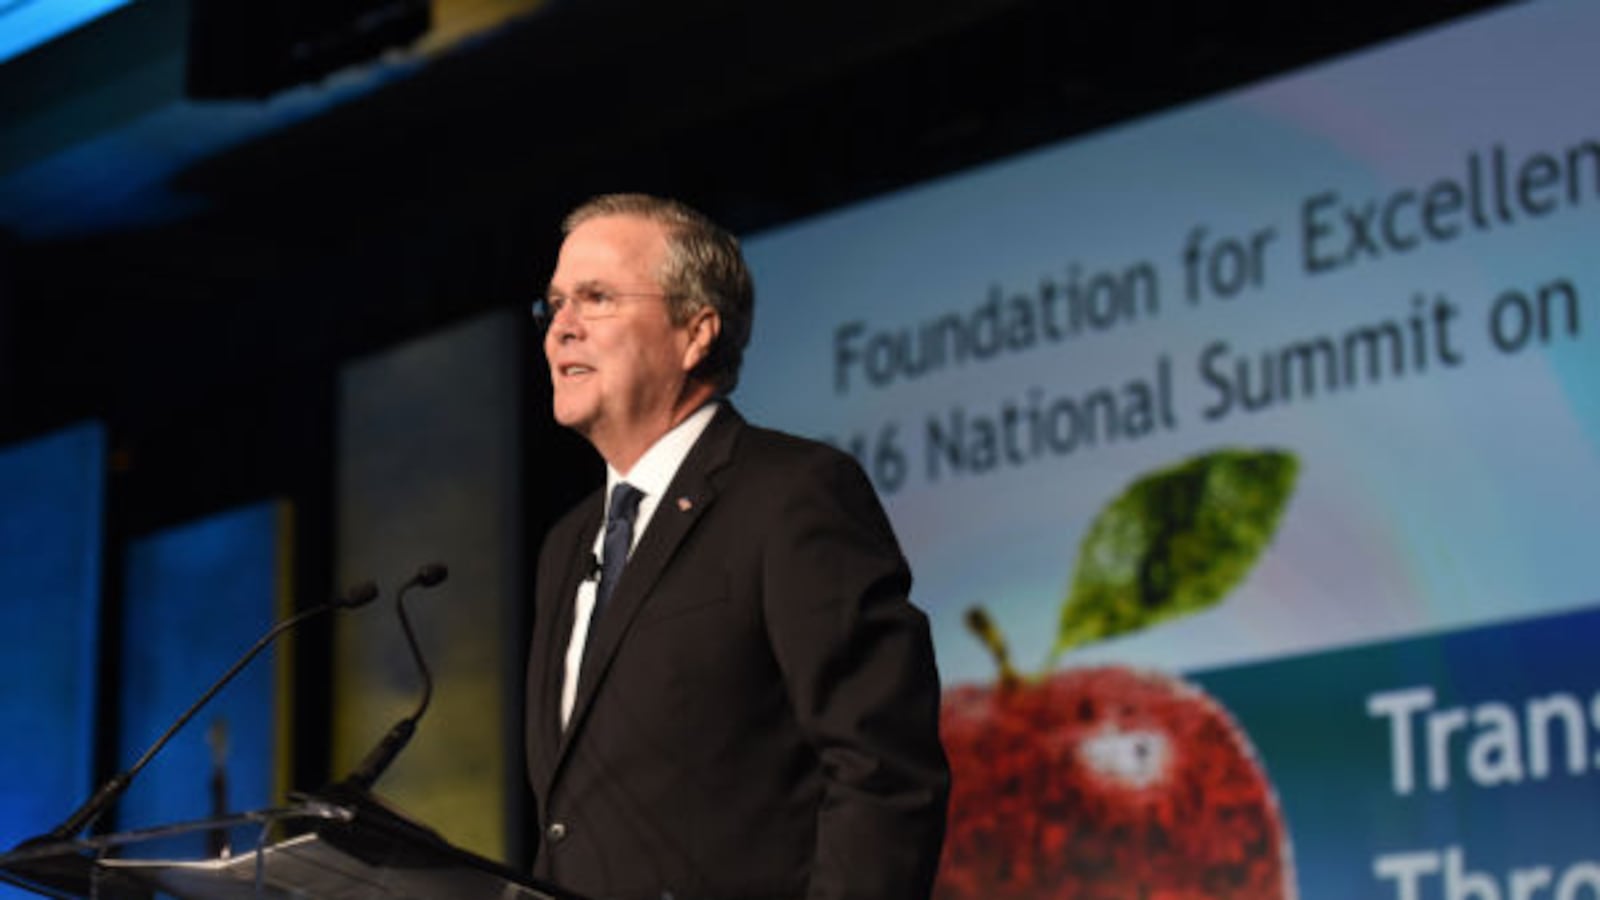 Former Florida Gov. Jeb Bush speaks during the 2016 National Summit on Education Reform in Washington D.C. Bush opens this year's two-day summit on Thursday in Nashville, Tennessee.